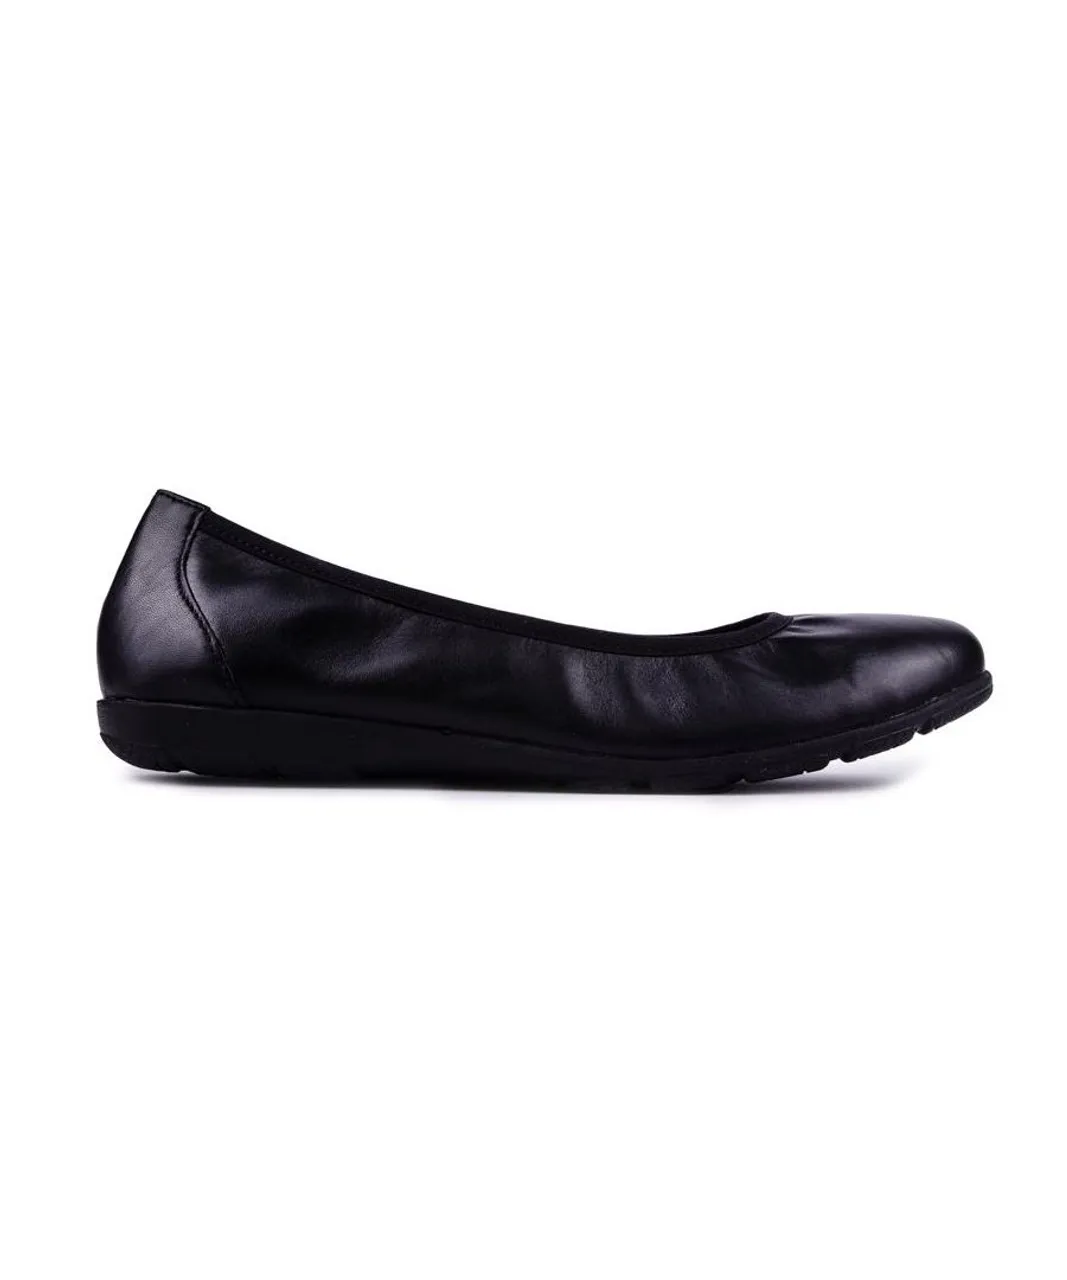 By Caprice Womens Leather Shoes - Black